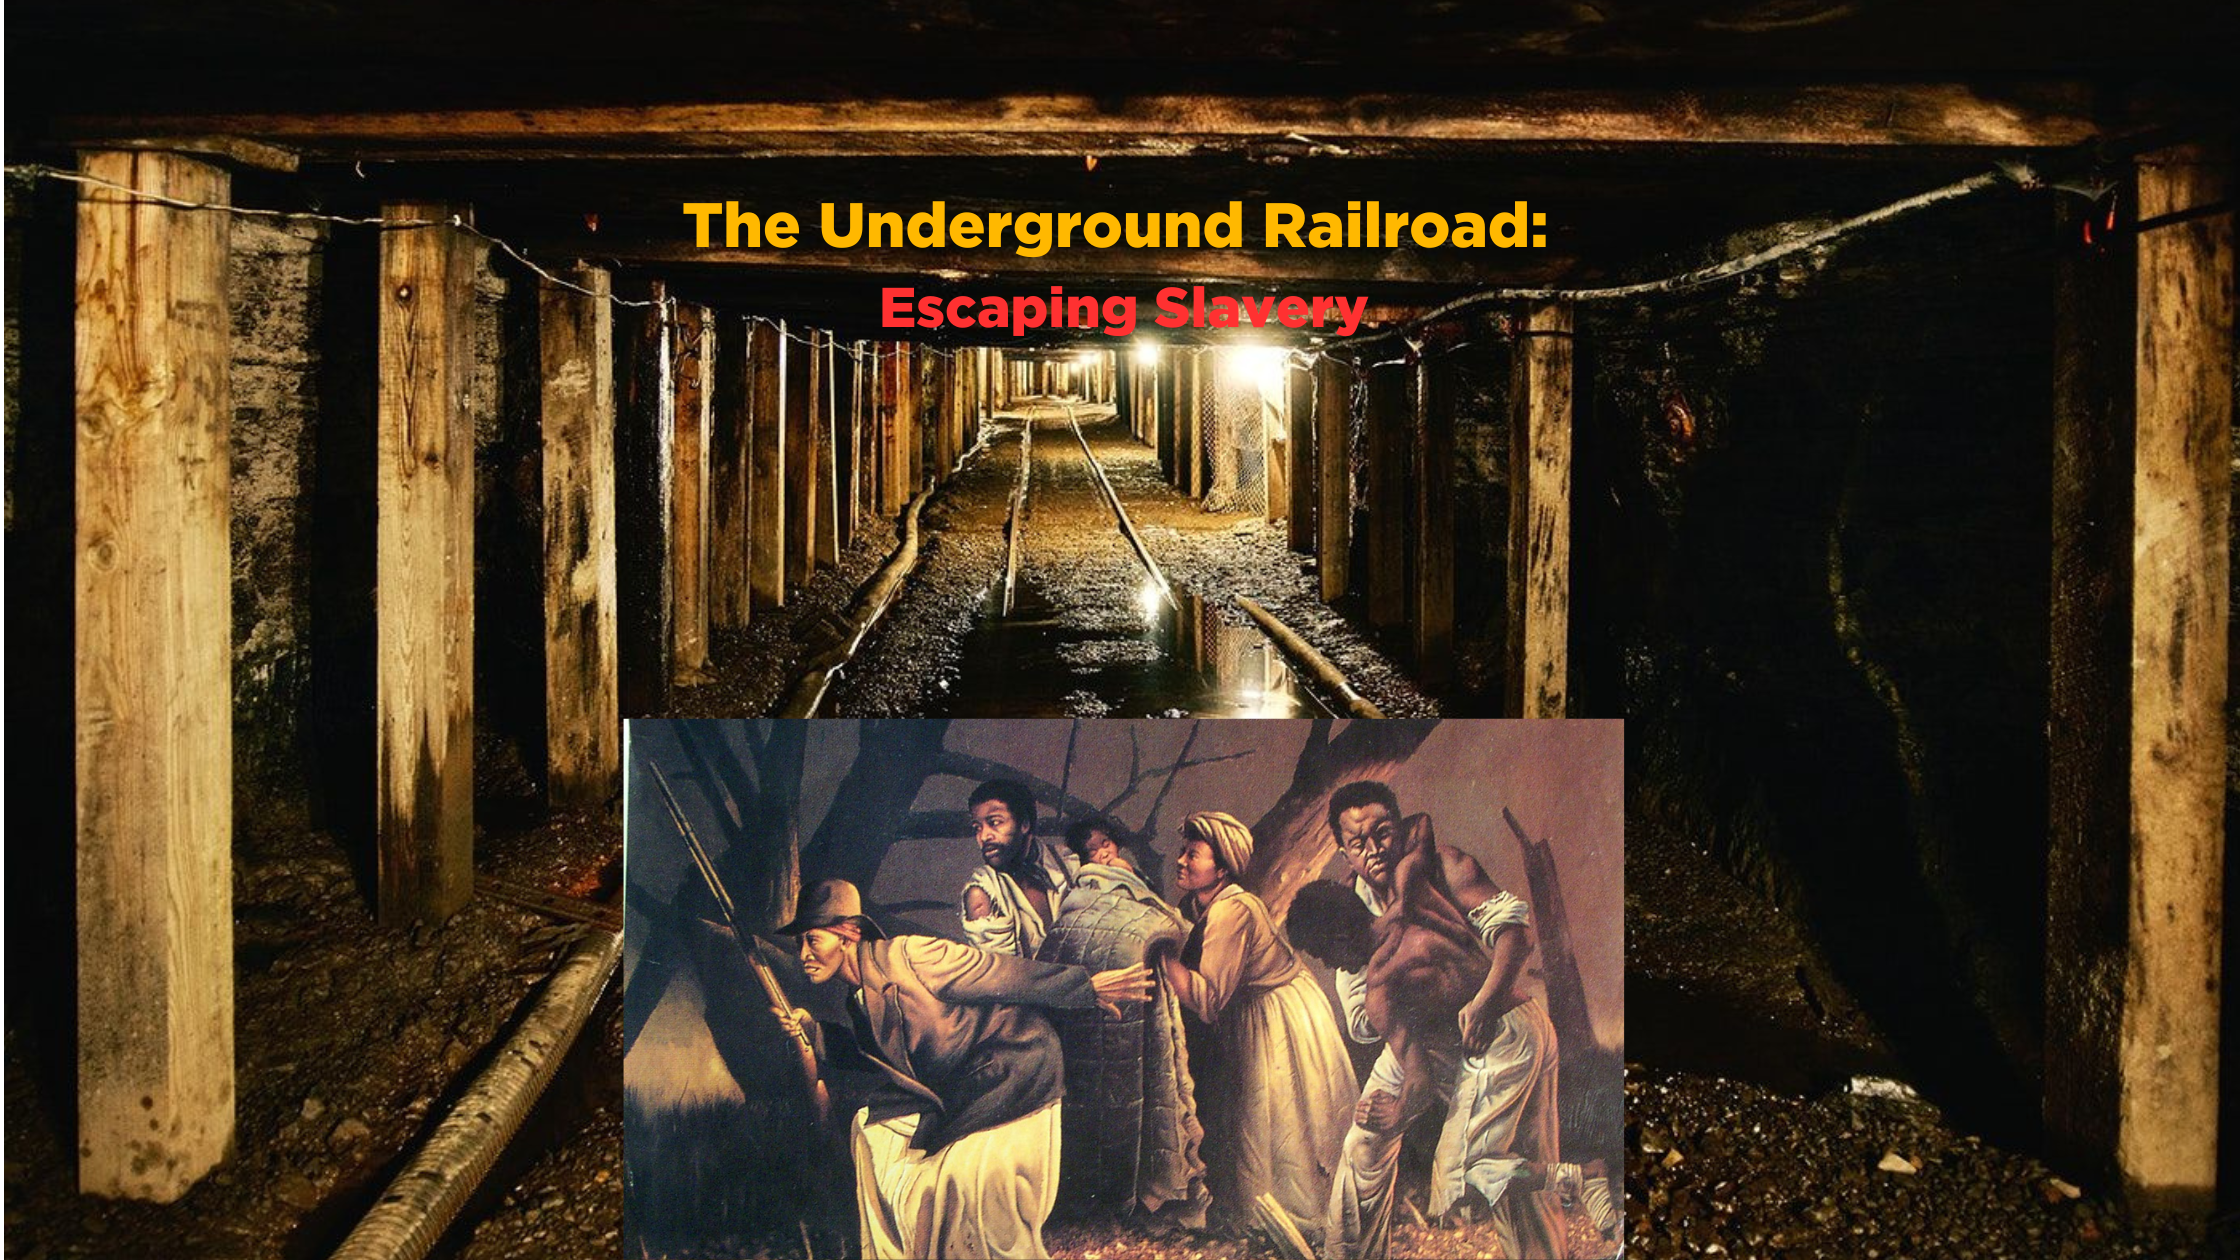 The Underground Railroad: Escaping Slavery